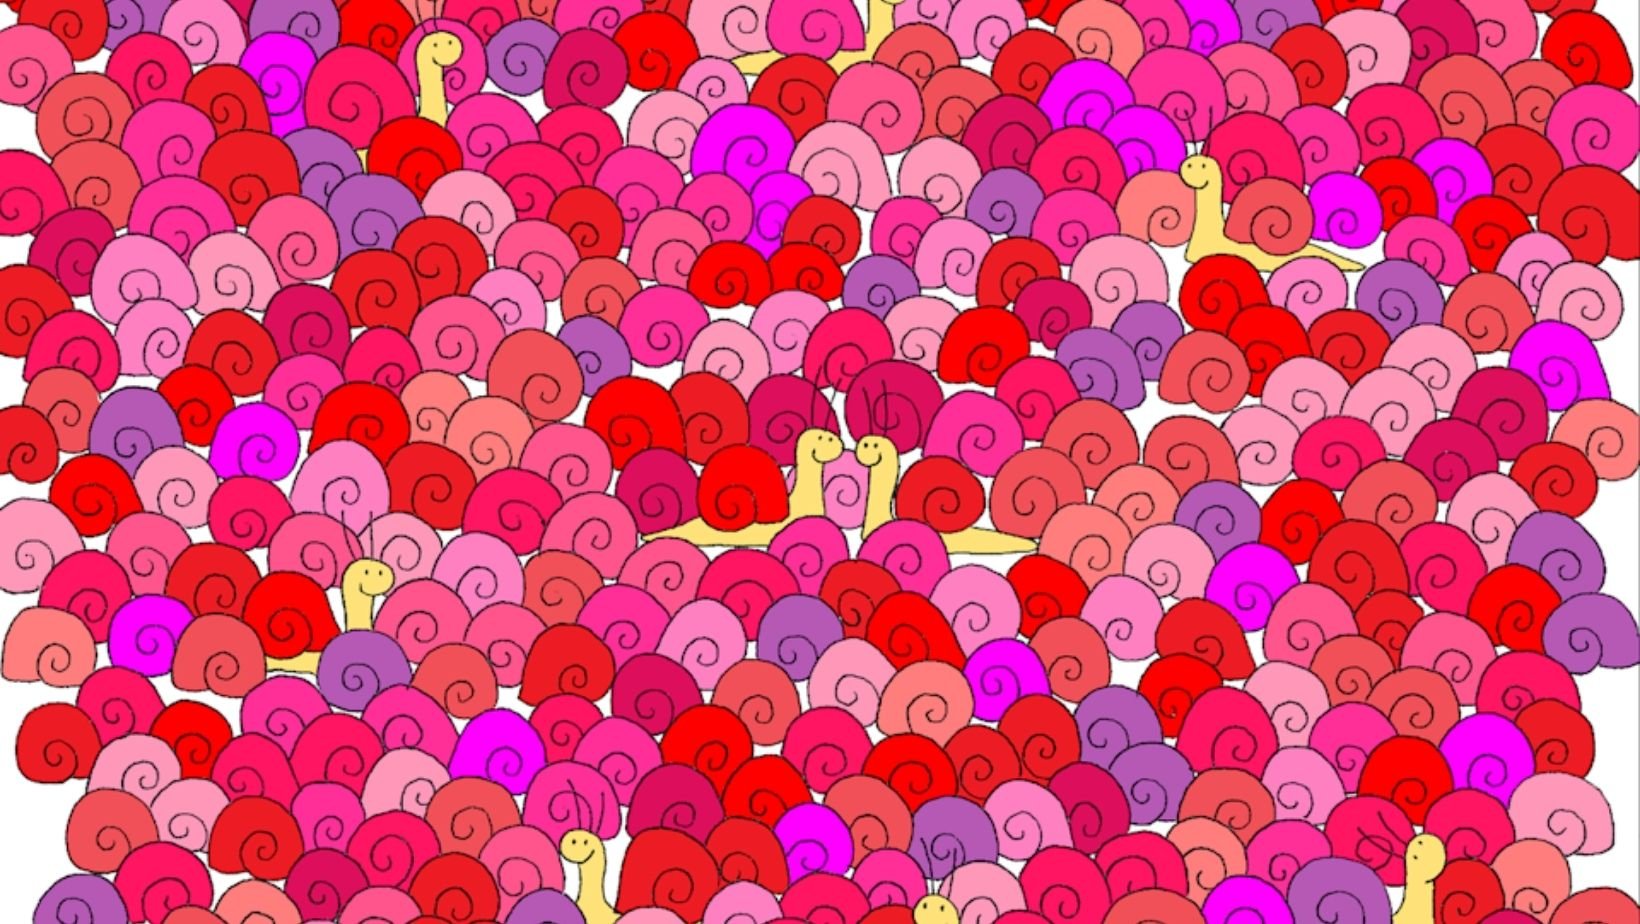 small joys thumbnail 16.jpg?resize=412,232 - Can You Spot The Hidden ‘HEART’ Among The Colorful Snails?